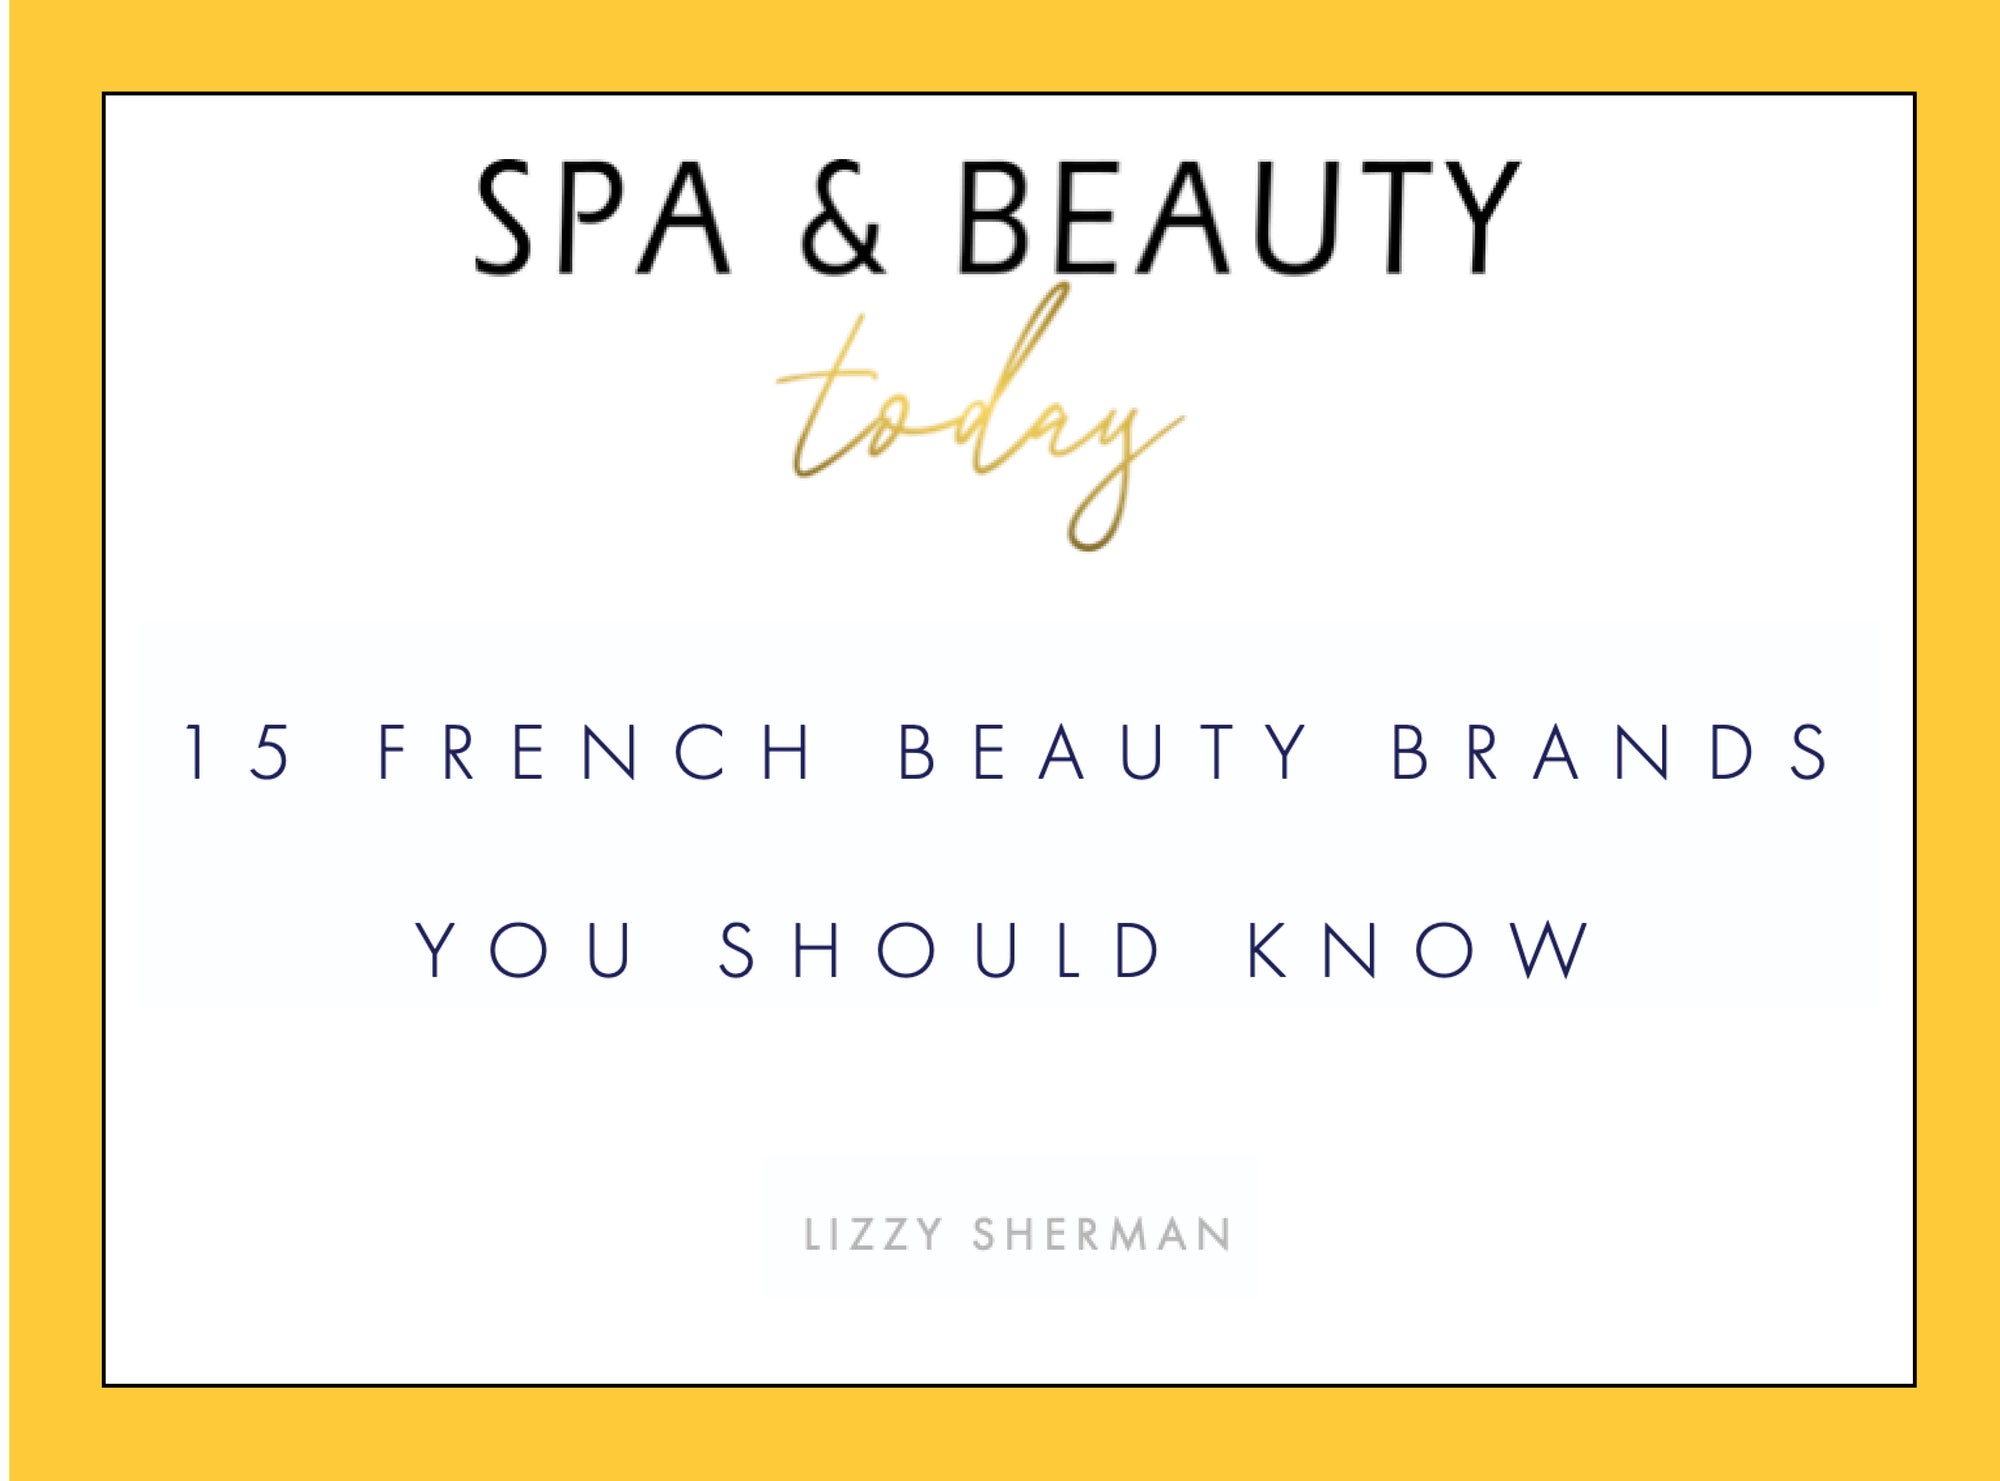 French beauty brands you should know.